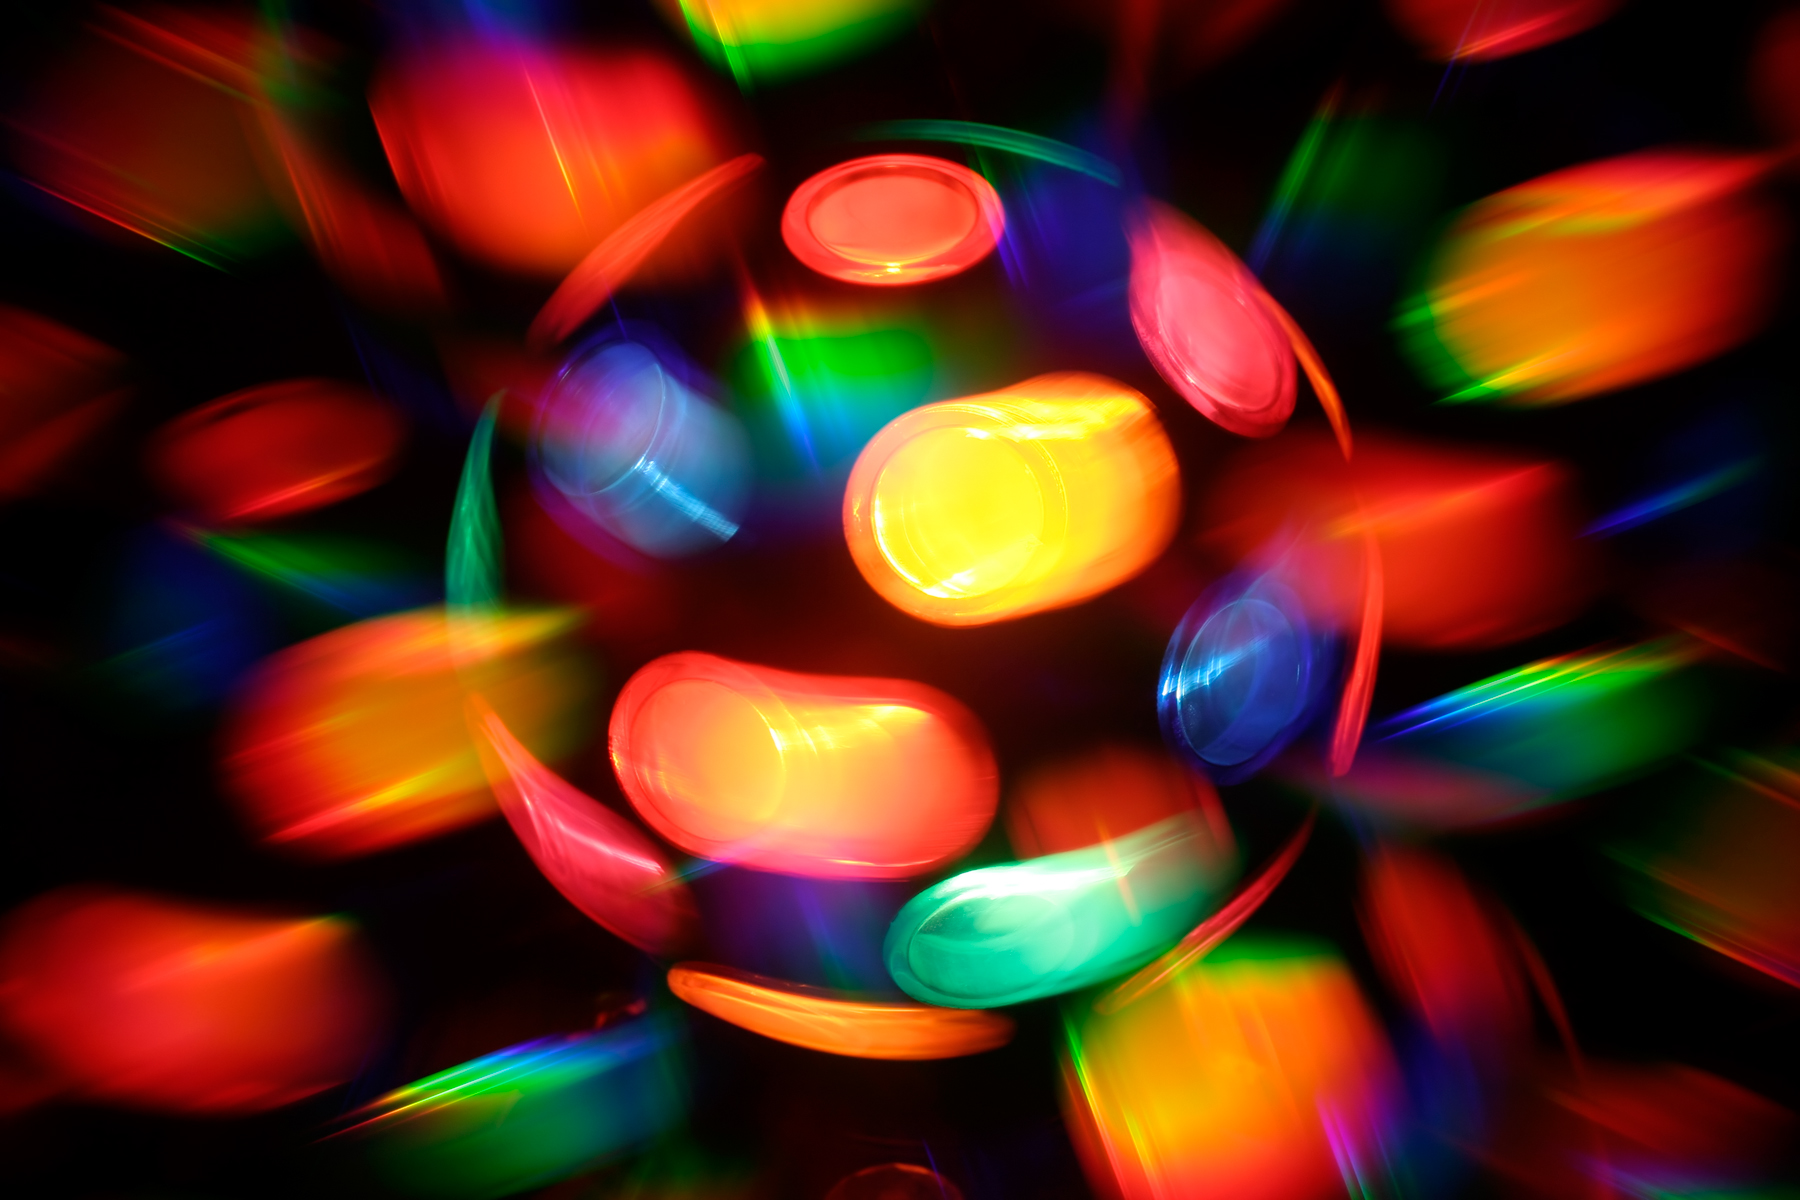 Spinning disco lamp abstract photo